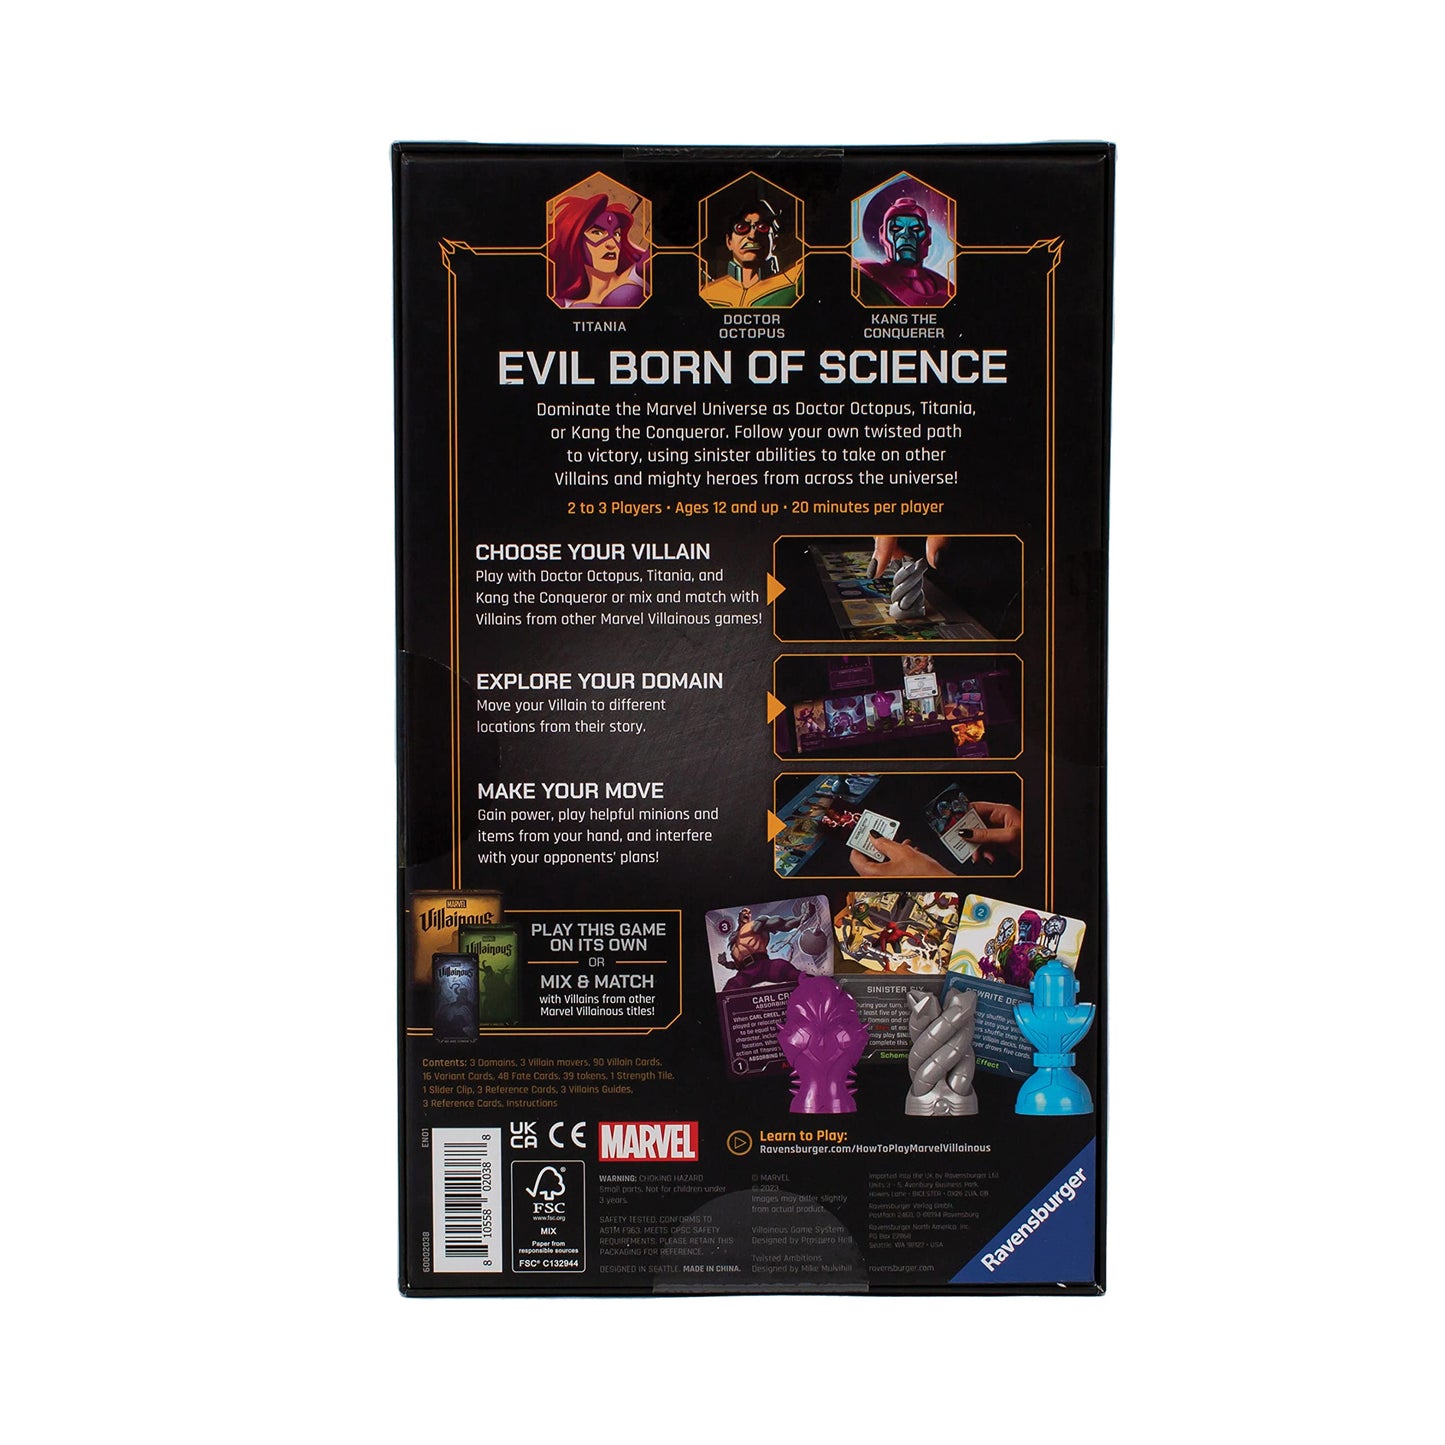 Ravensburger Marvel Villainous: Twisted Ambitions Strategy Board Game for Ages 12 &amp; Up – The Newest Standalone Game in The Marvel Villainous Line